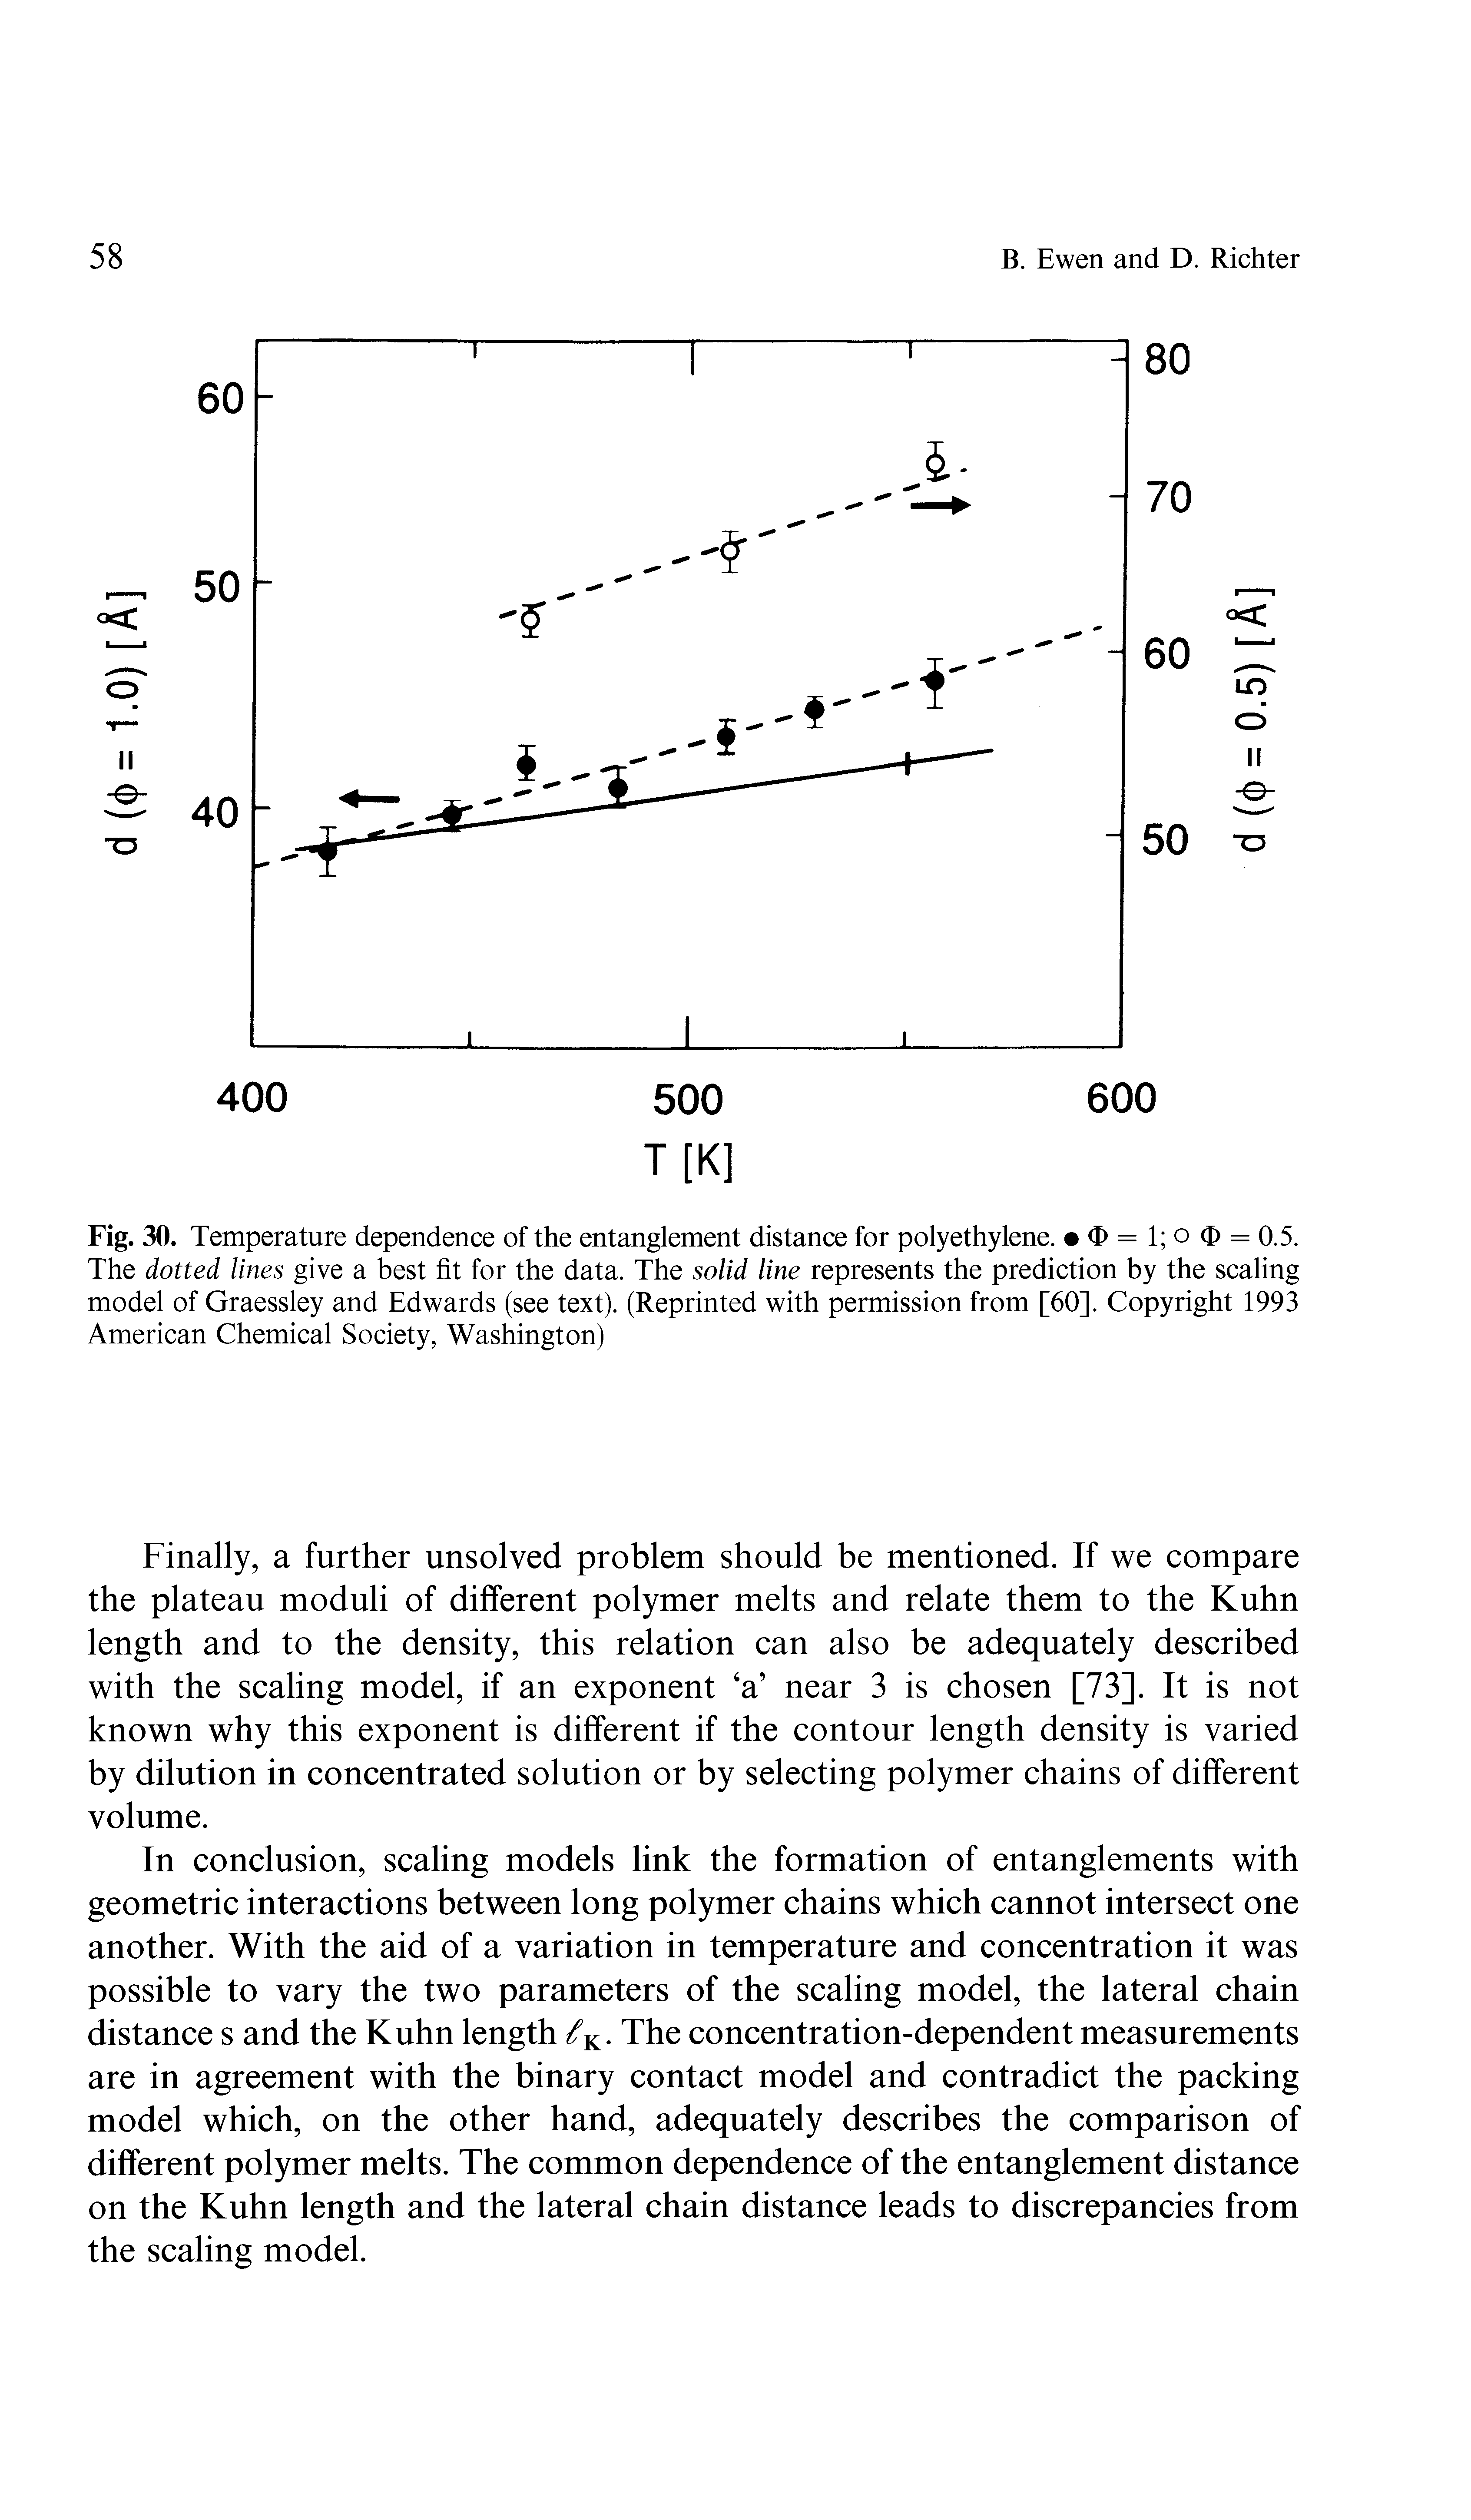 Fig. 30. Temperature dependence of the entanglement distance for polyethylene. > = 1 o O = 0.5. The dotted lines give a best fit for the data. The solid line represents the prediction by the scaling model of Graessley and Edwards (see text). (Reprinted with permission from [60]. Copyright 1993 American Chemical Society, Washington)...